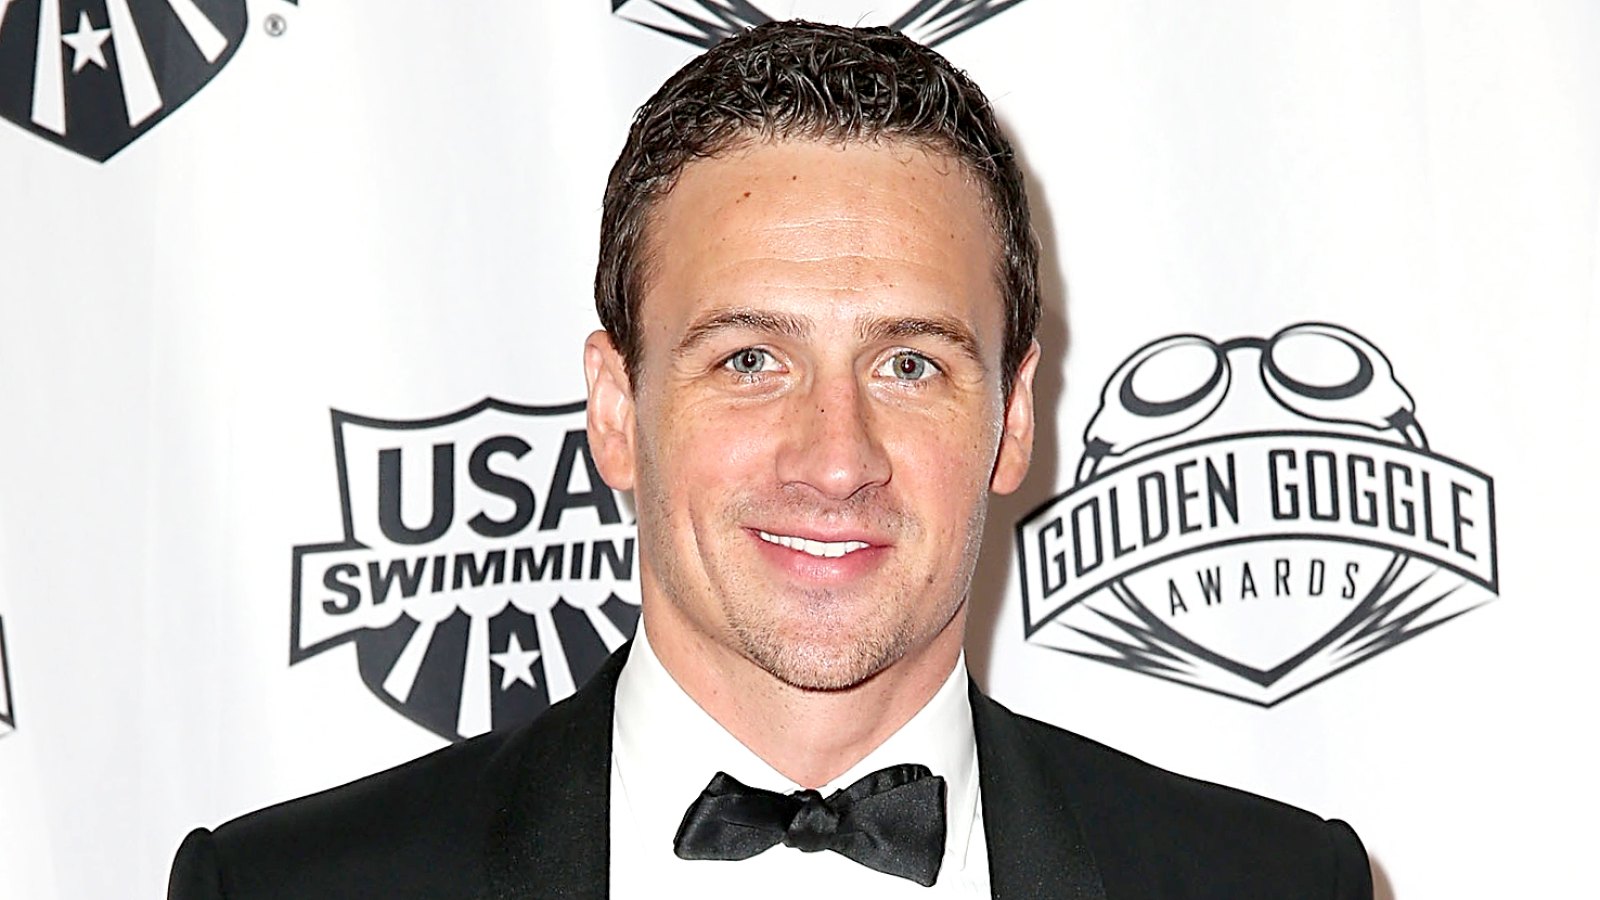 Ryan Lochte attends the 2015 USA Swimming Golden Goggle Awards at J.W. Marriot at L.A. Live on November 22, 2015 in Los Angeles, California.